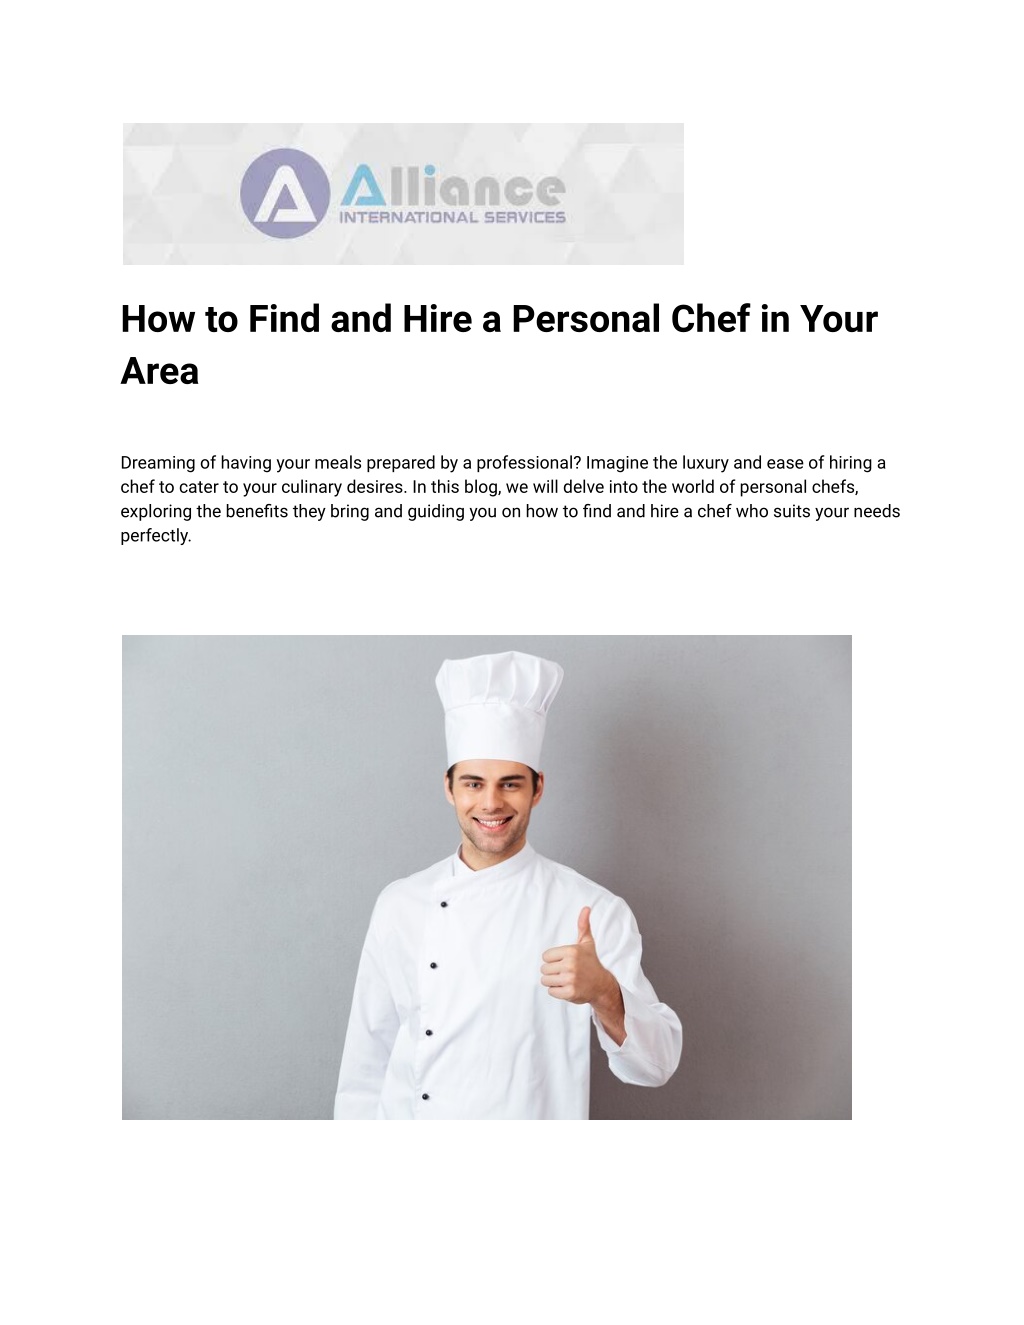 how to find and hire a personal chef in your area l.w